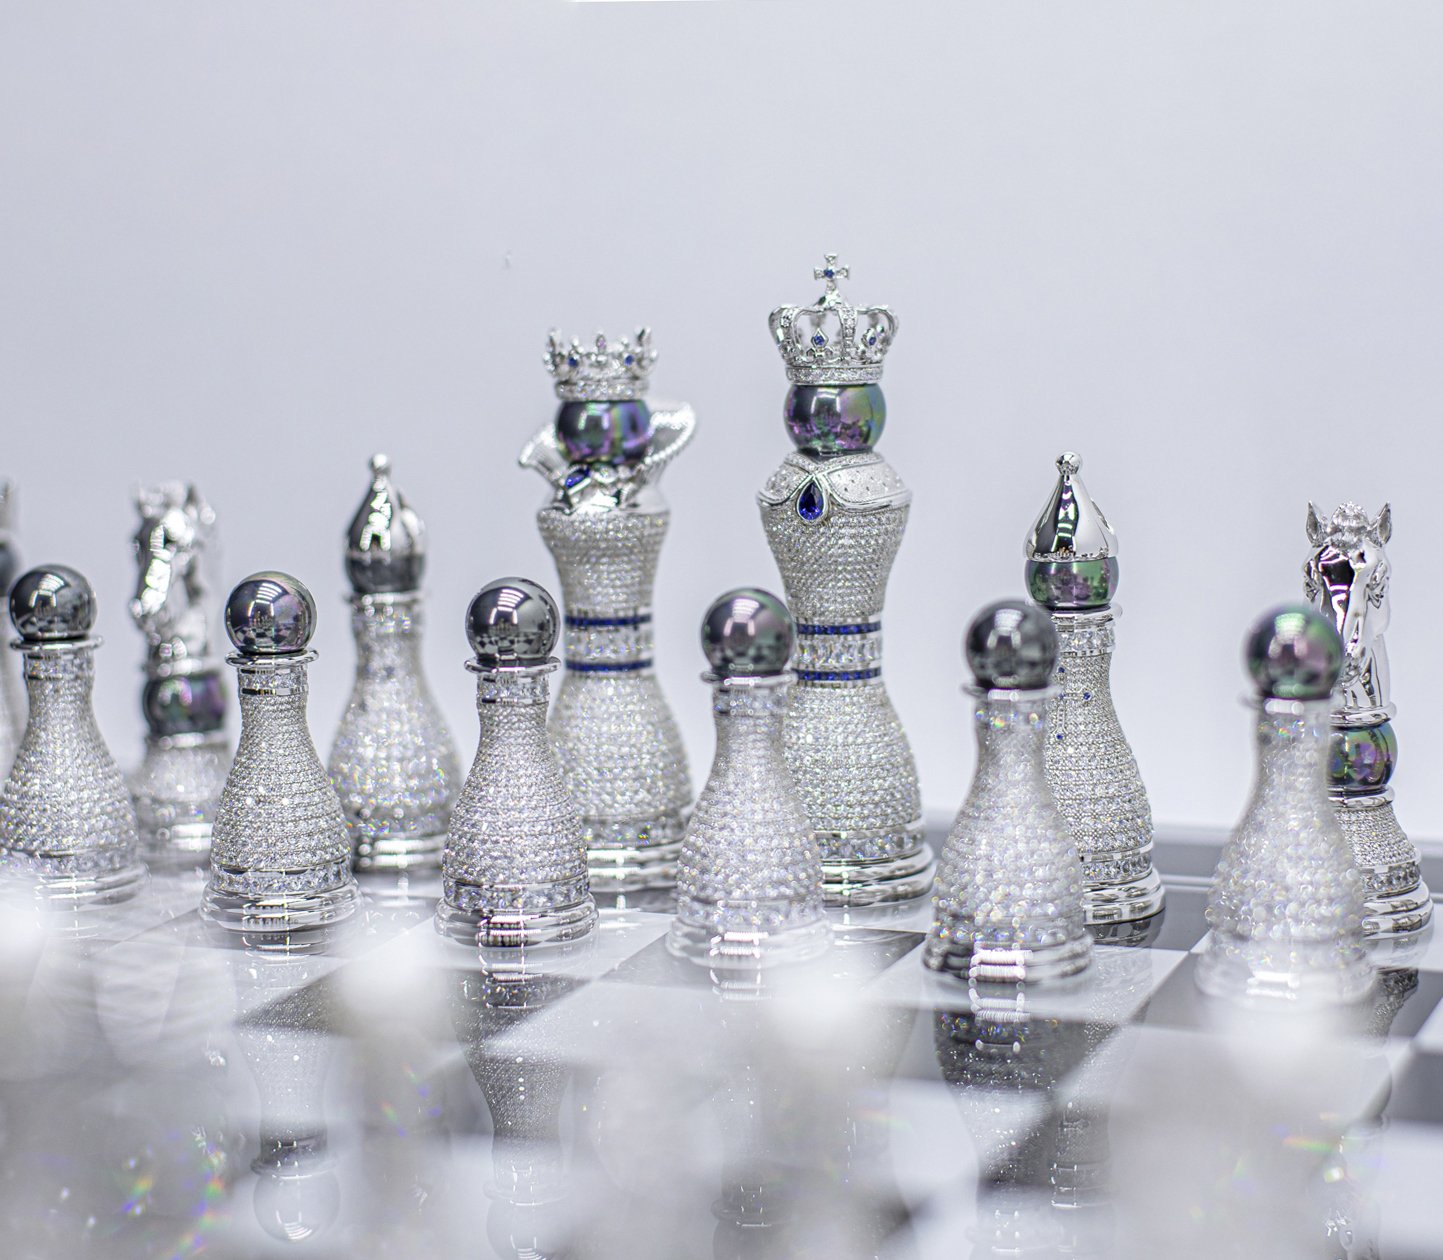 World's Most Expensive Chess Set : Pearl Royale